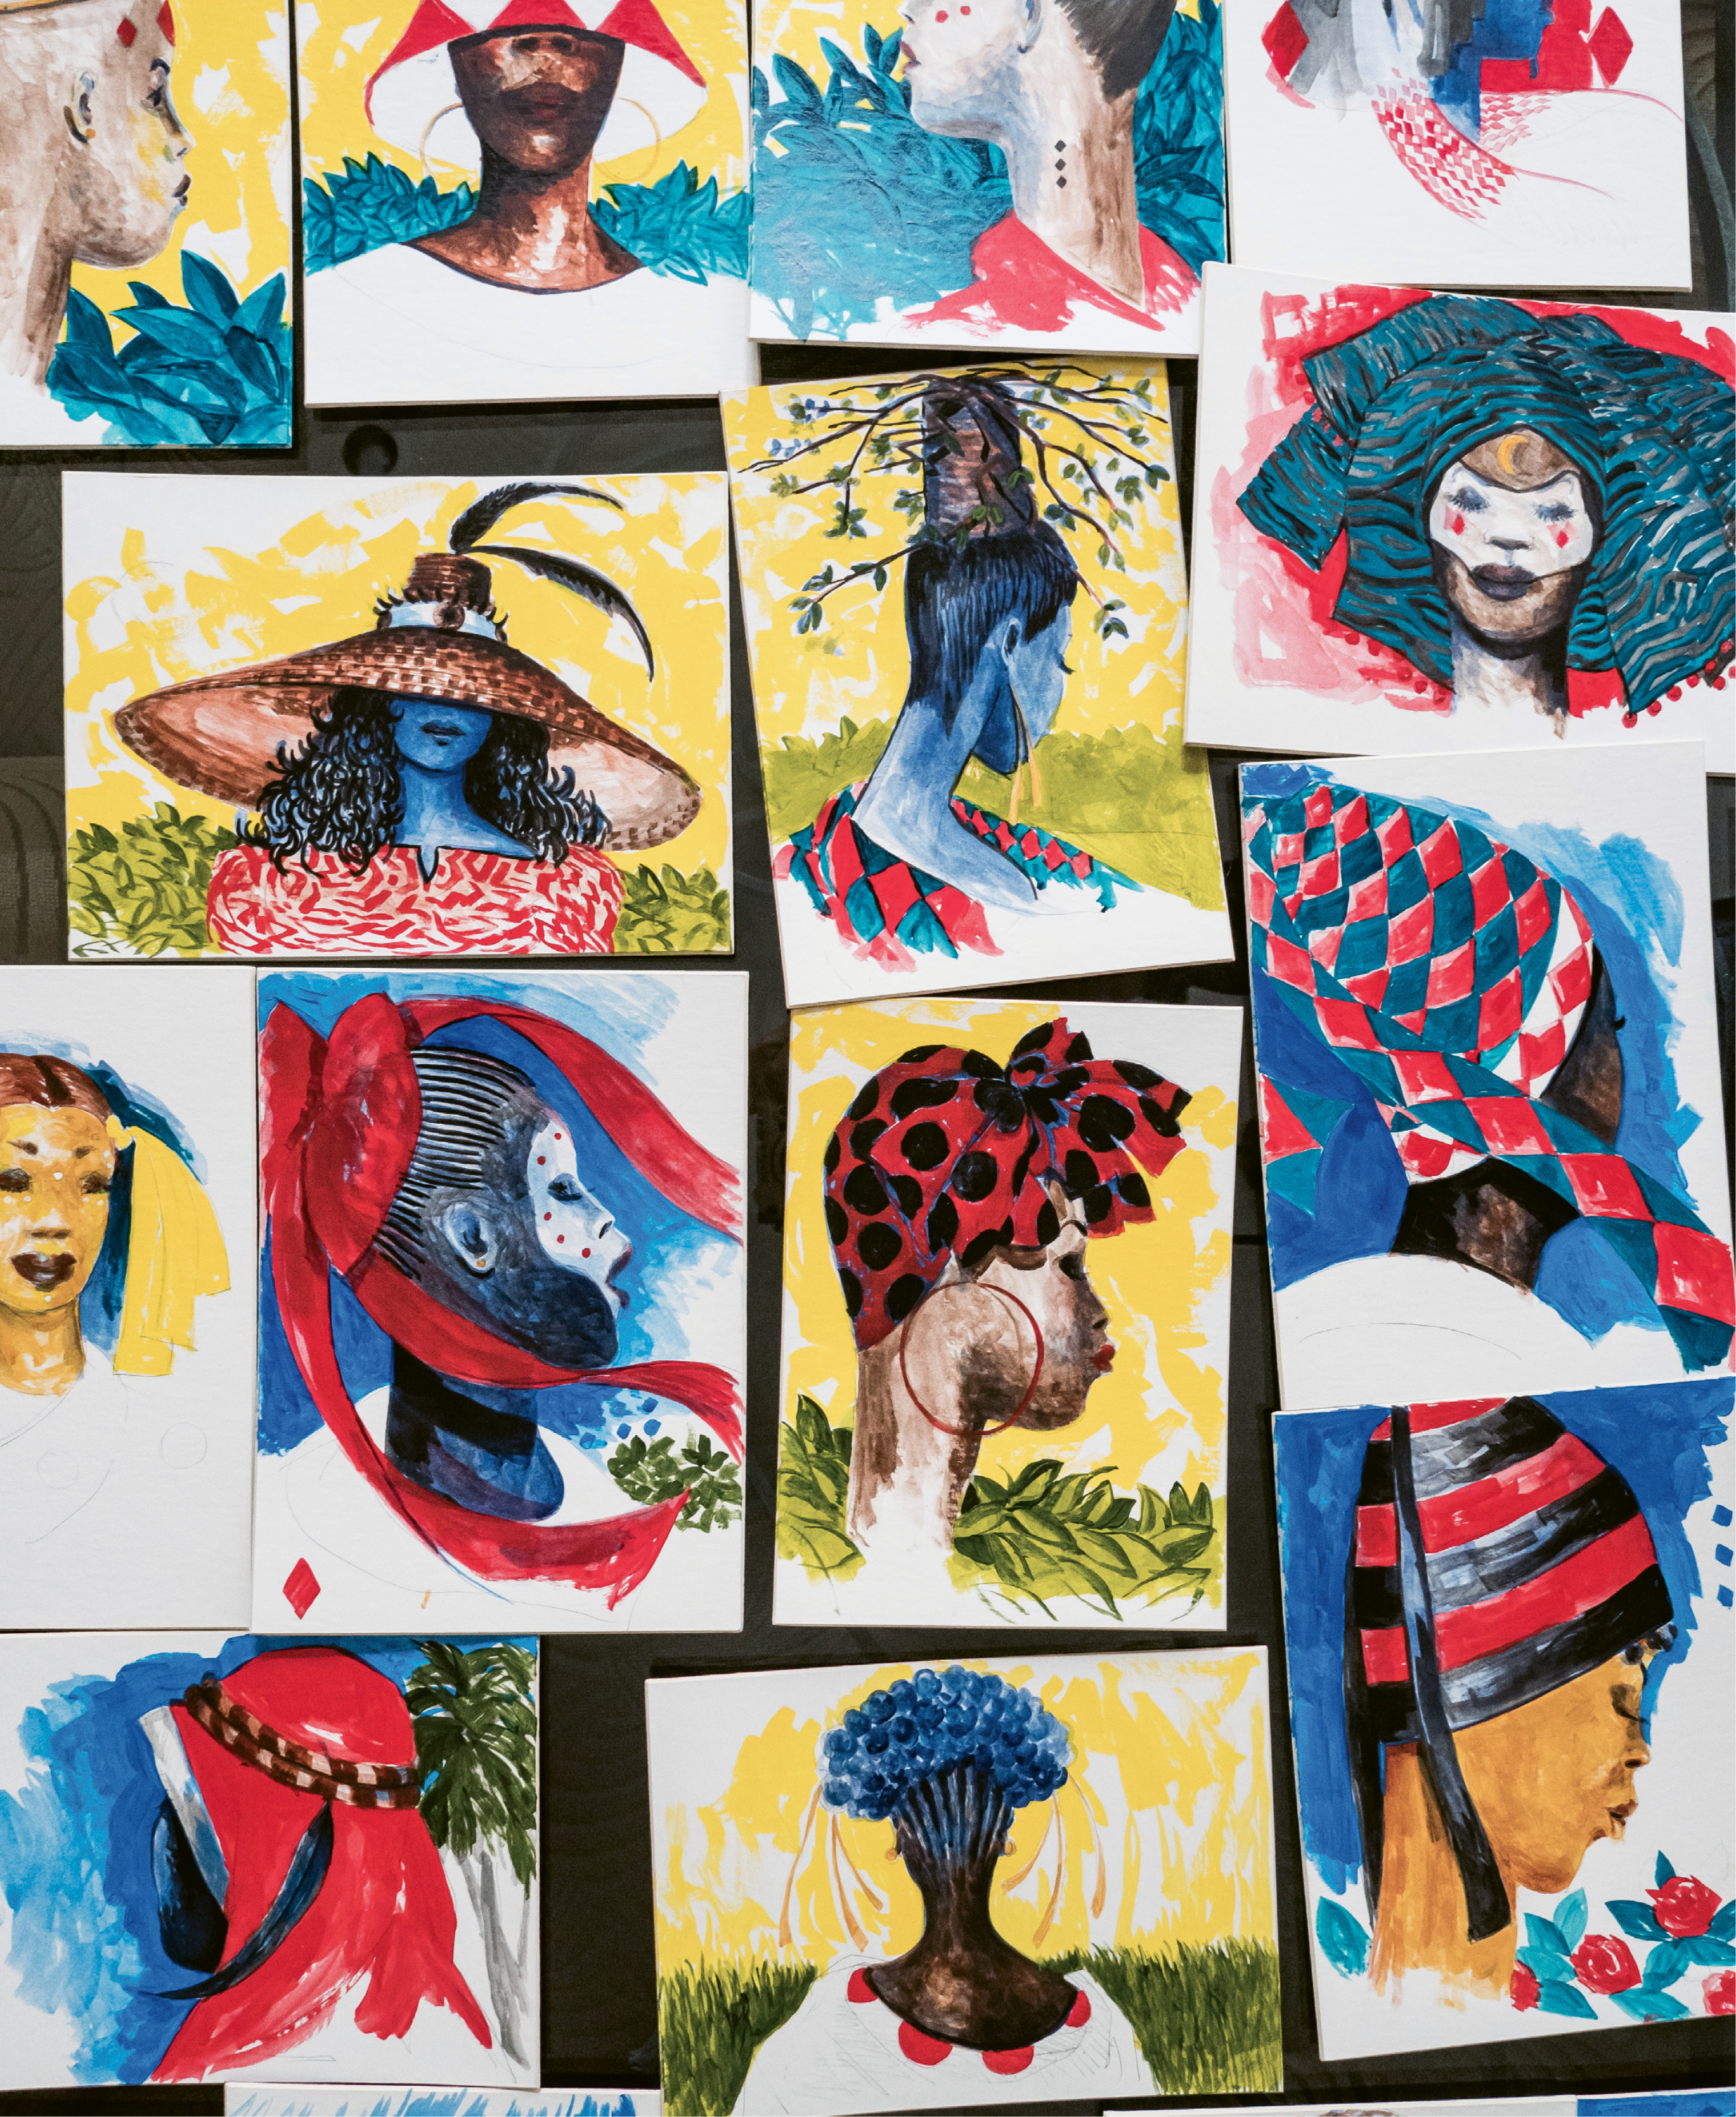 As the visual designer for Spoleto Festival USA’s production of Porgy and Bess, he developed the looks for the characters, first by loosely sketching his ideas in acrylic on cardboard, visualizing, as he says, “how they dress, as people of their culture, displaying their Africanness.”